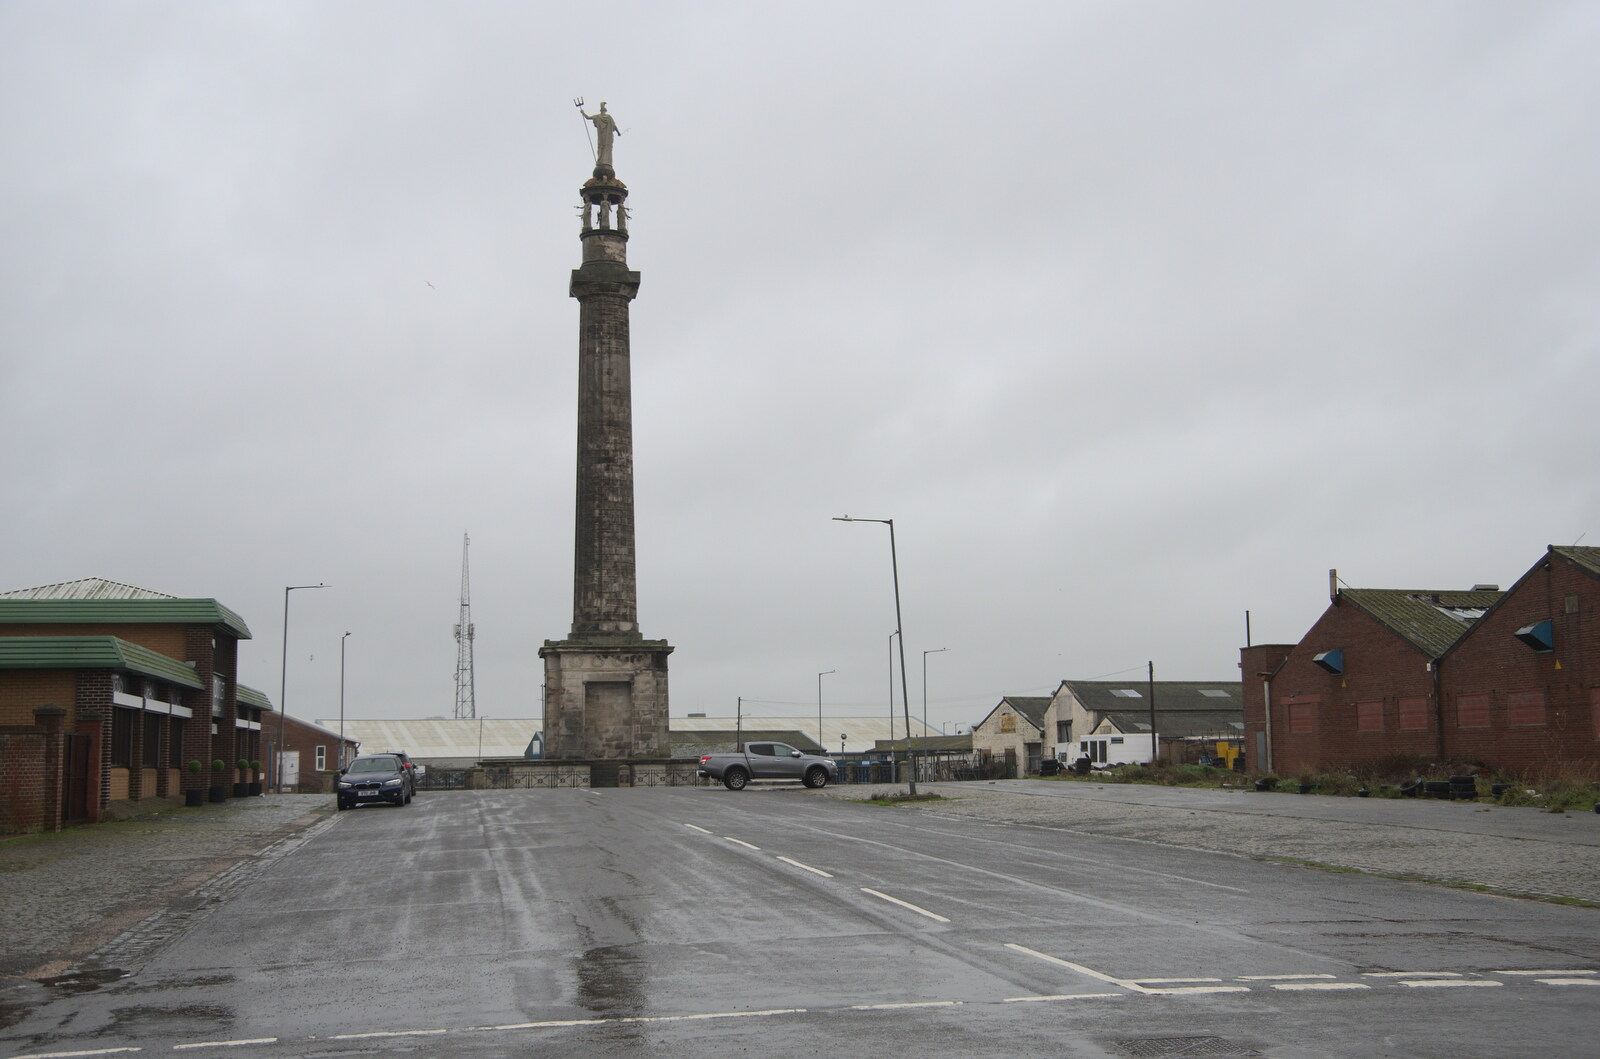 The Britannia Monument and Monument Road from The Hippodrome Christmas Spectacular, Great Yarmouth, Norfolk - 29th December 2022